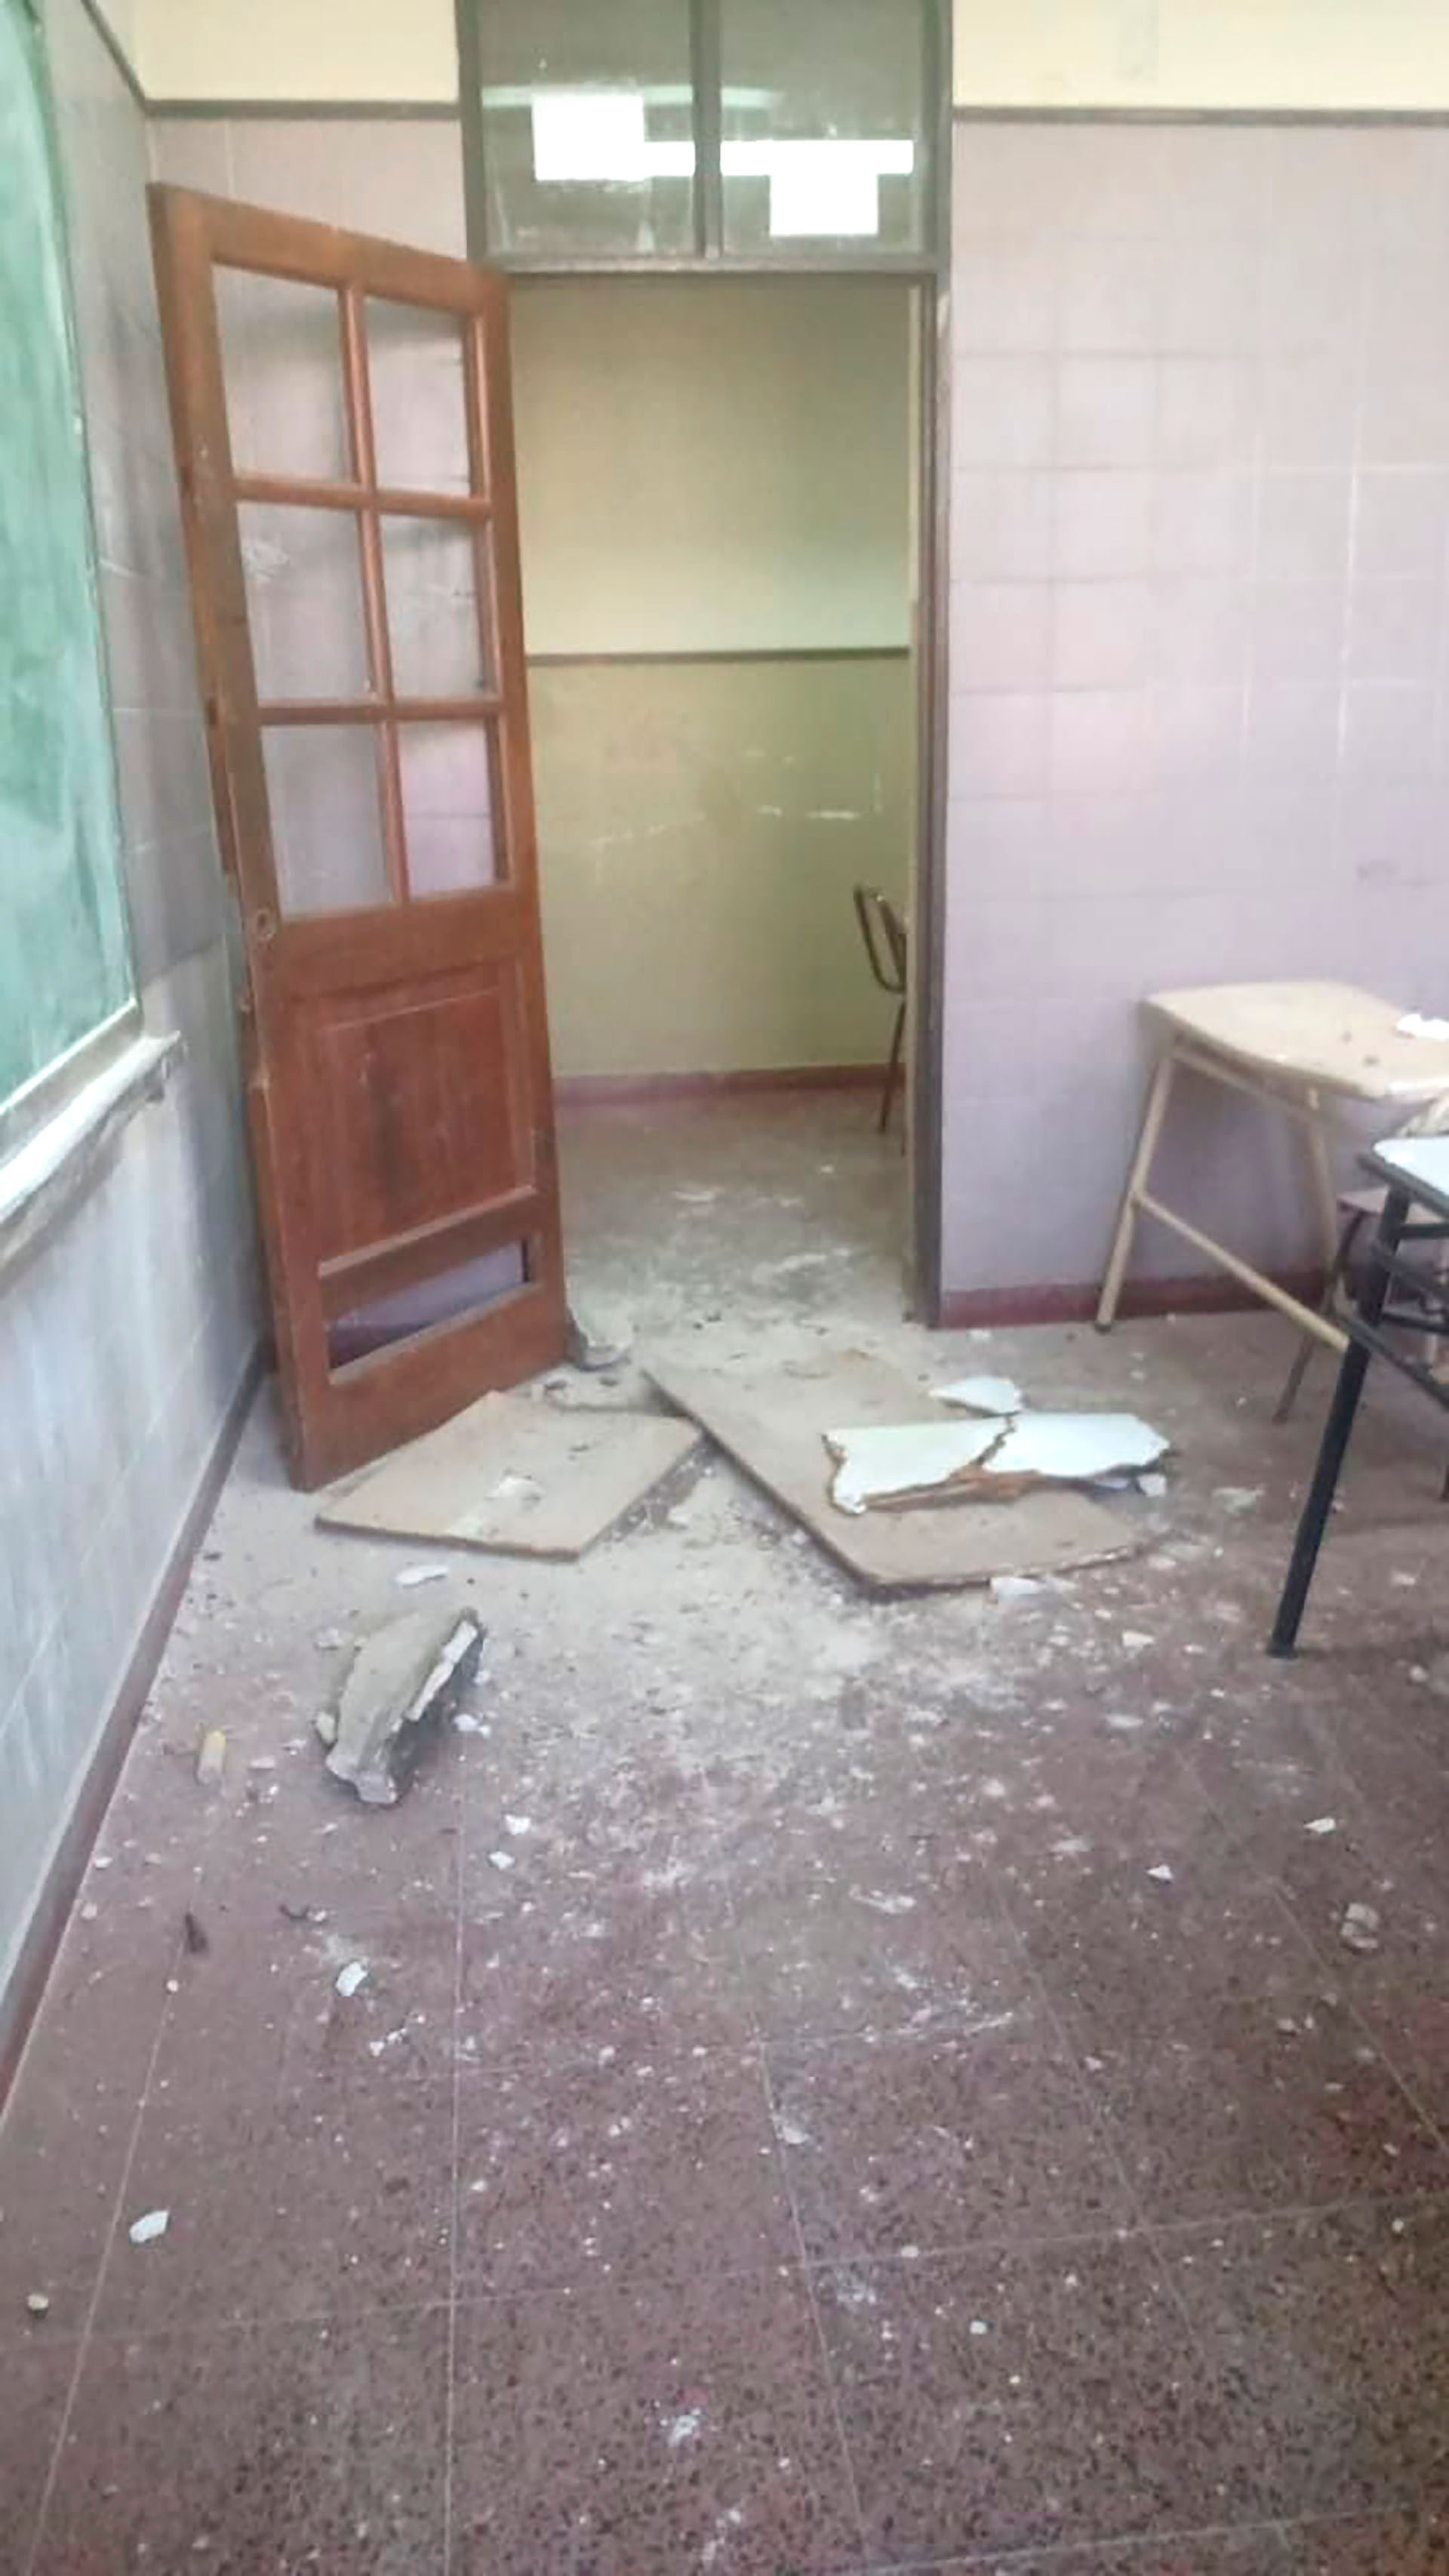 The convent that fell in the school classroom